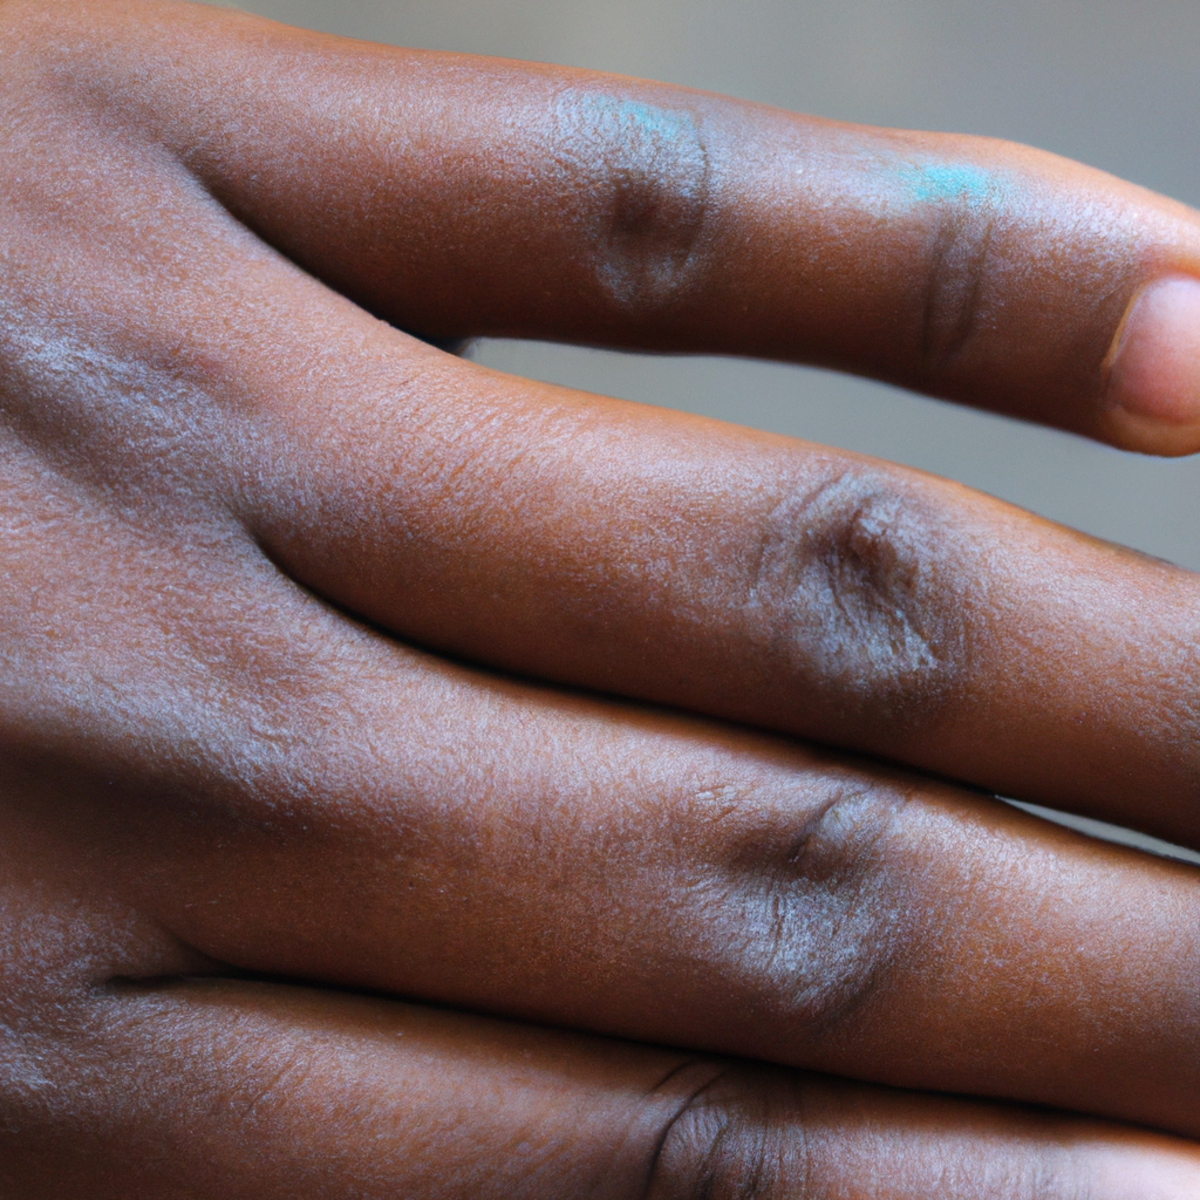 Close-up of human hand with bluish hue, smooth texture, against neutral background, highlighting Argyria's effects.